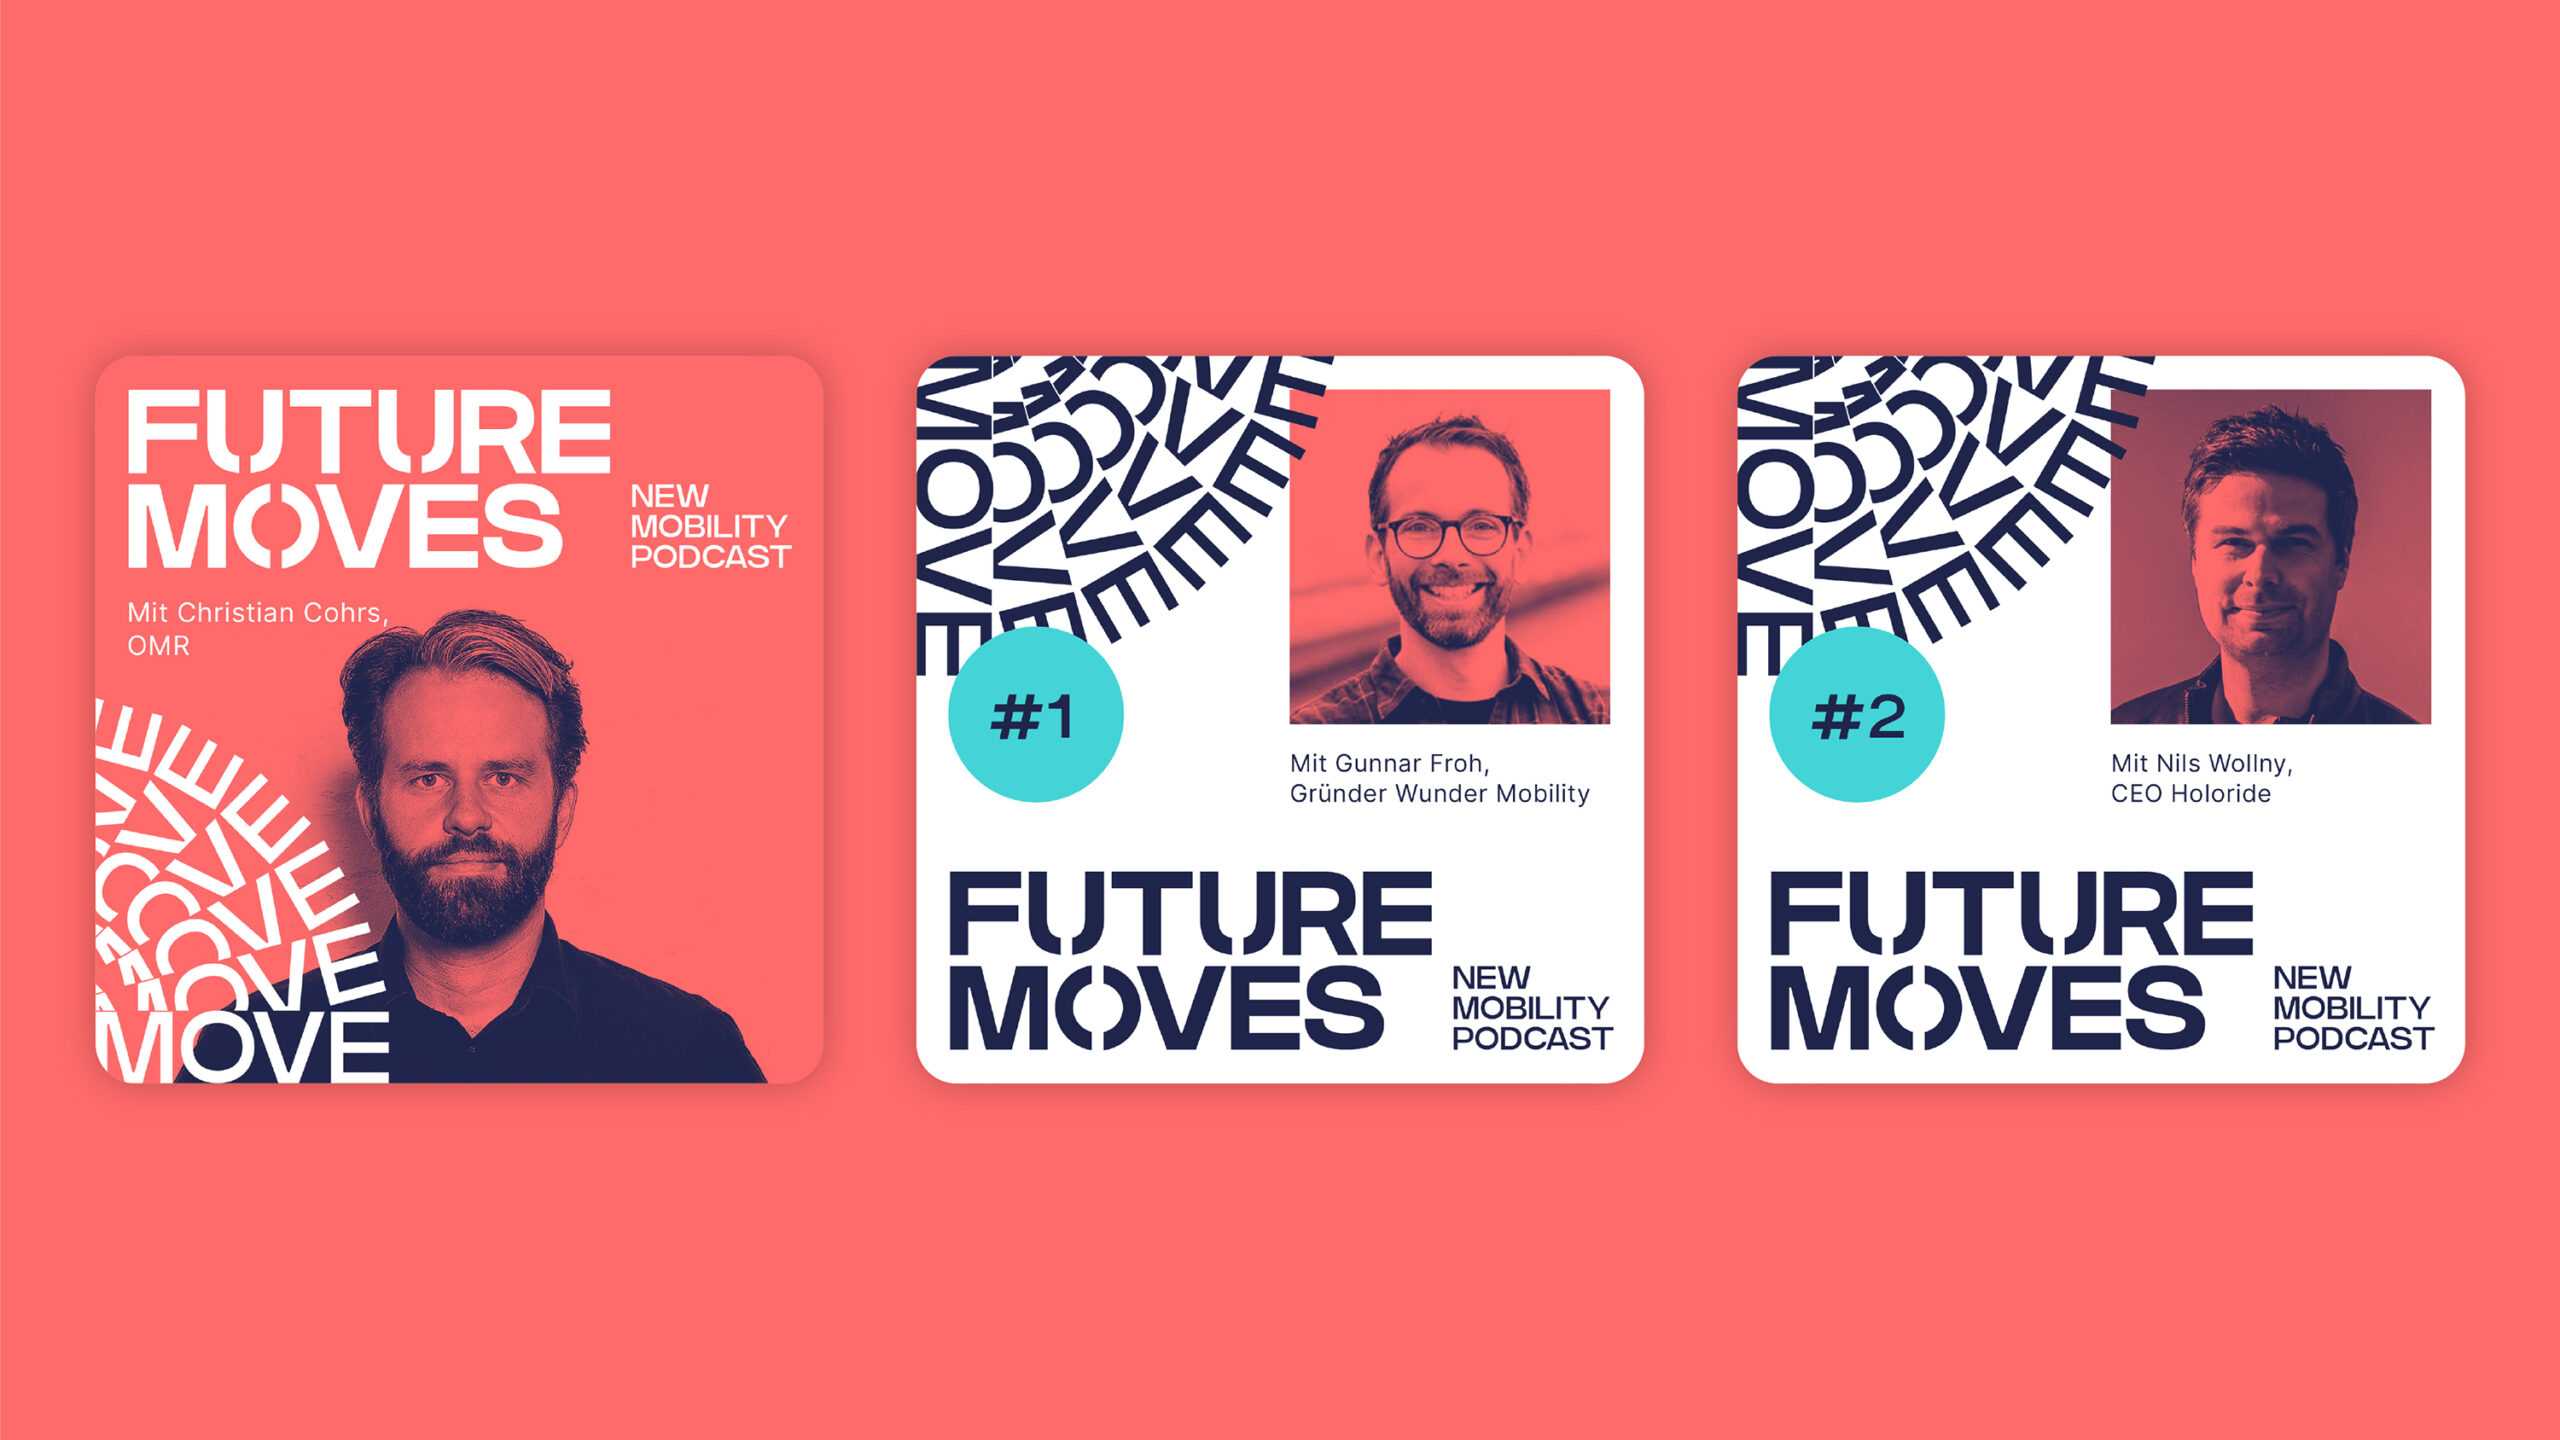 Future moves podcast cards